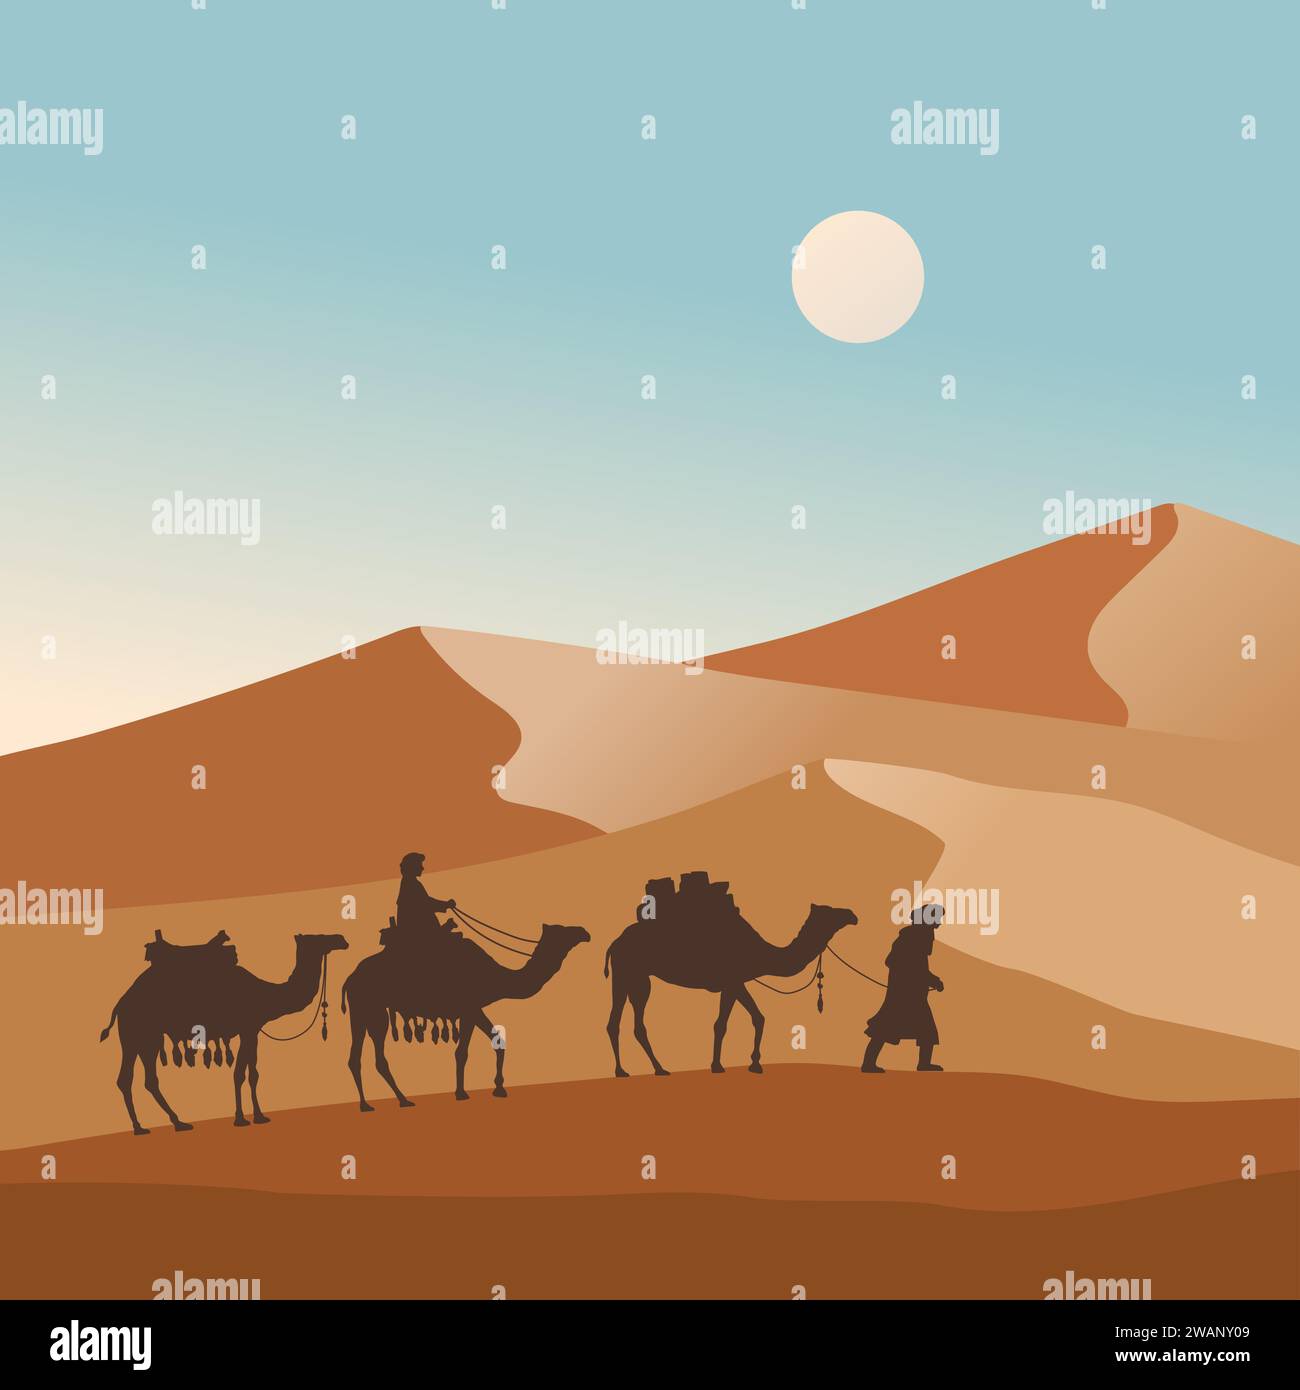 Camel caravan going through the desert vector illustration, can use for islamic background, banners, poster, website, social and print media. Stock Vector